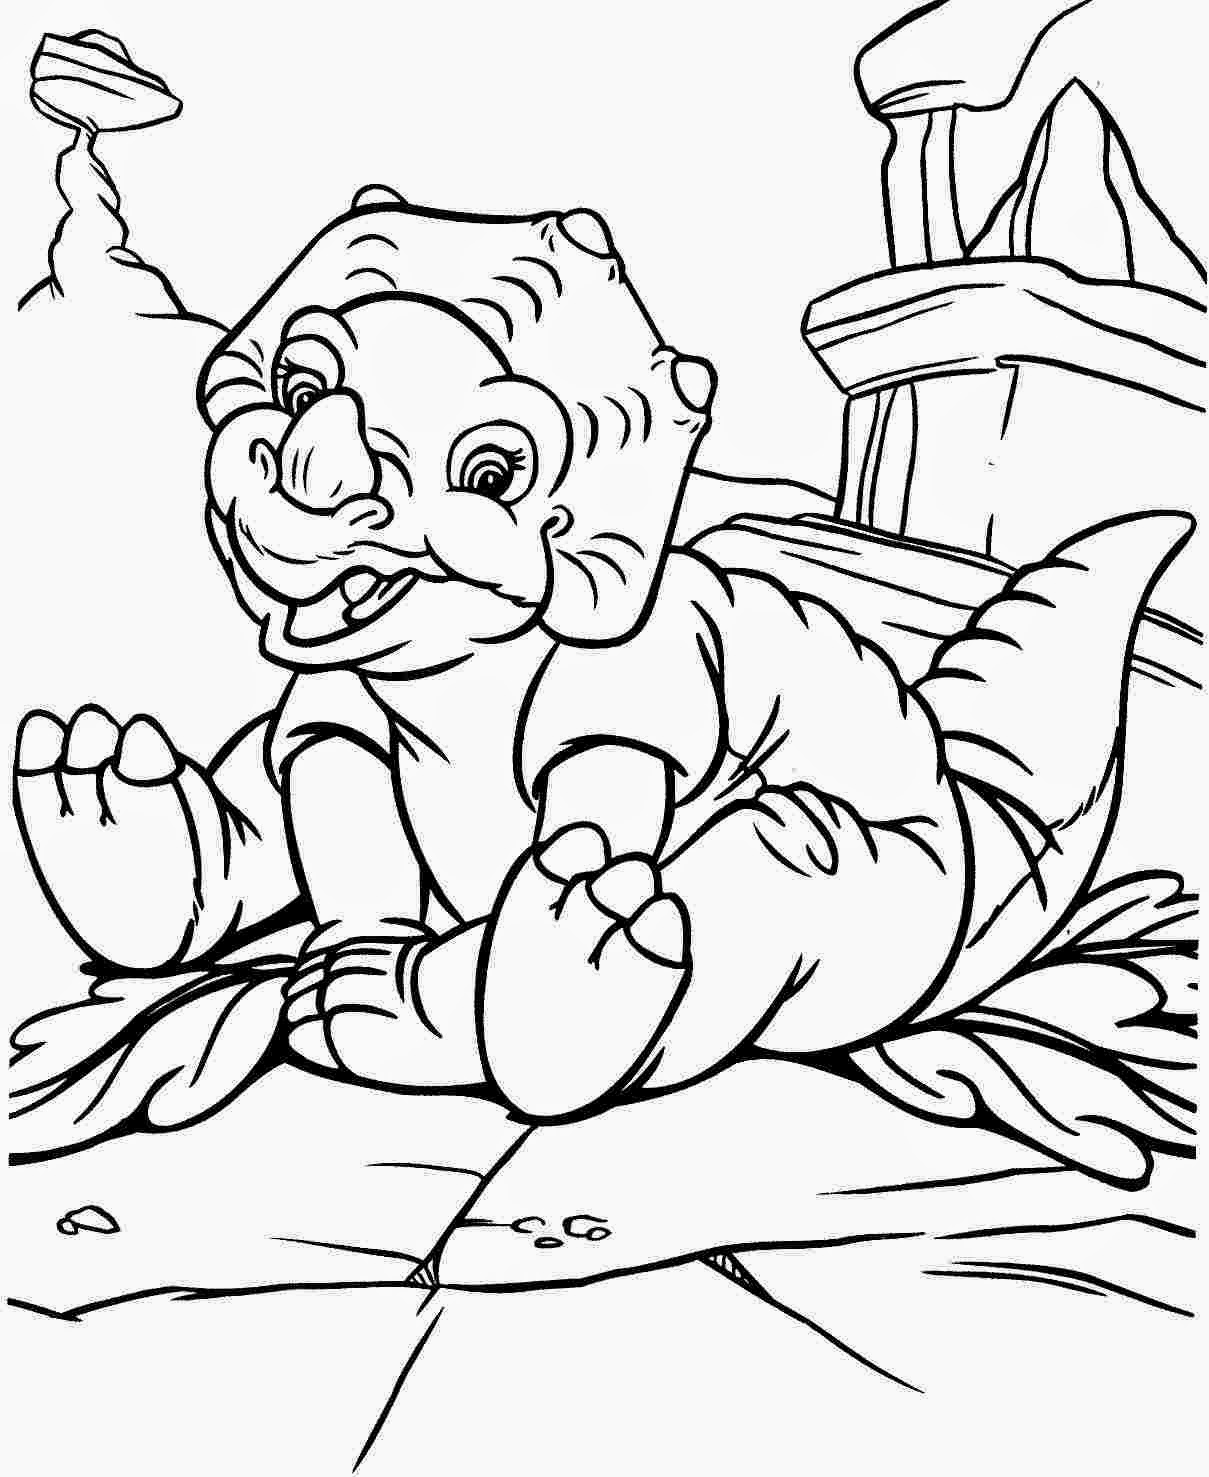 dinosaur-colouring-pages-in-the-playroom